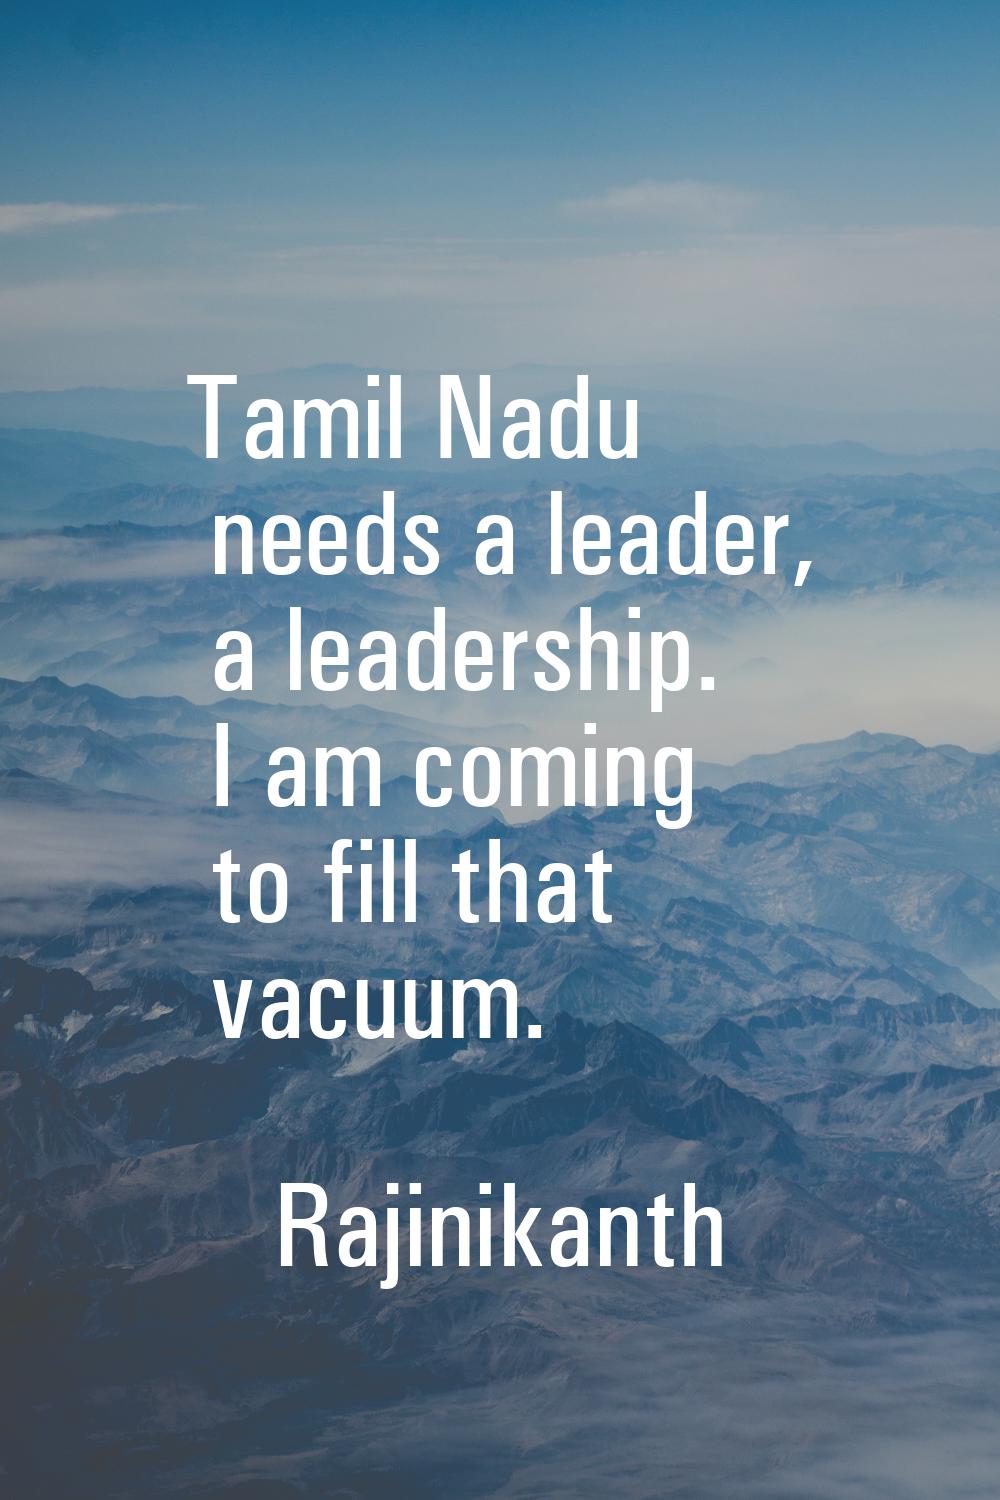 Tamil Nadu needs a leader, a leadership. I am coming to fill that vacuum.